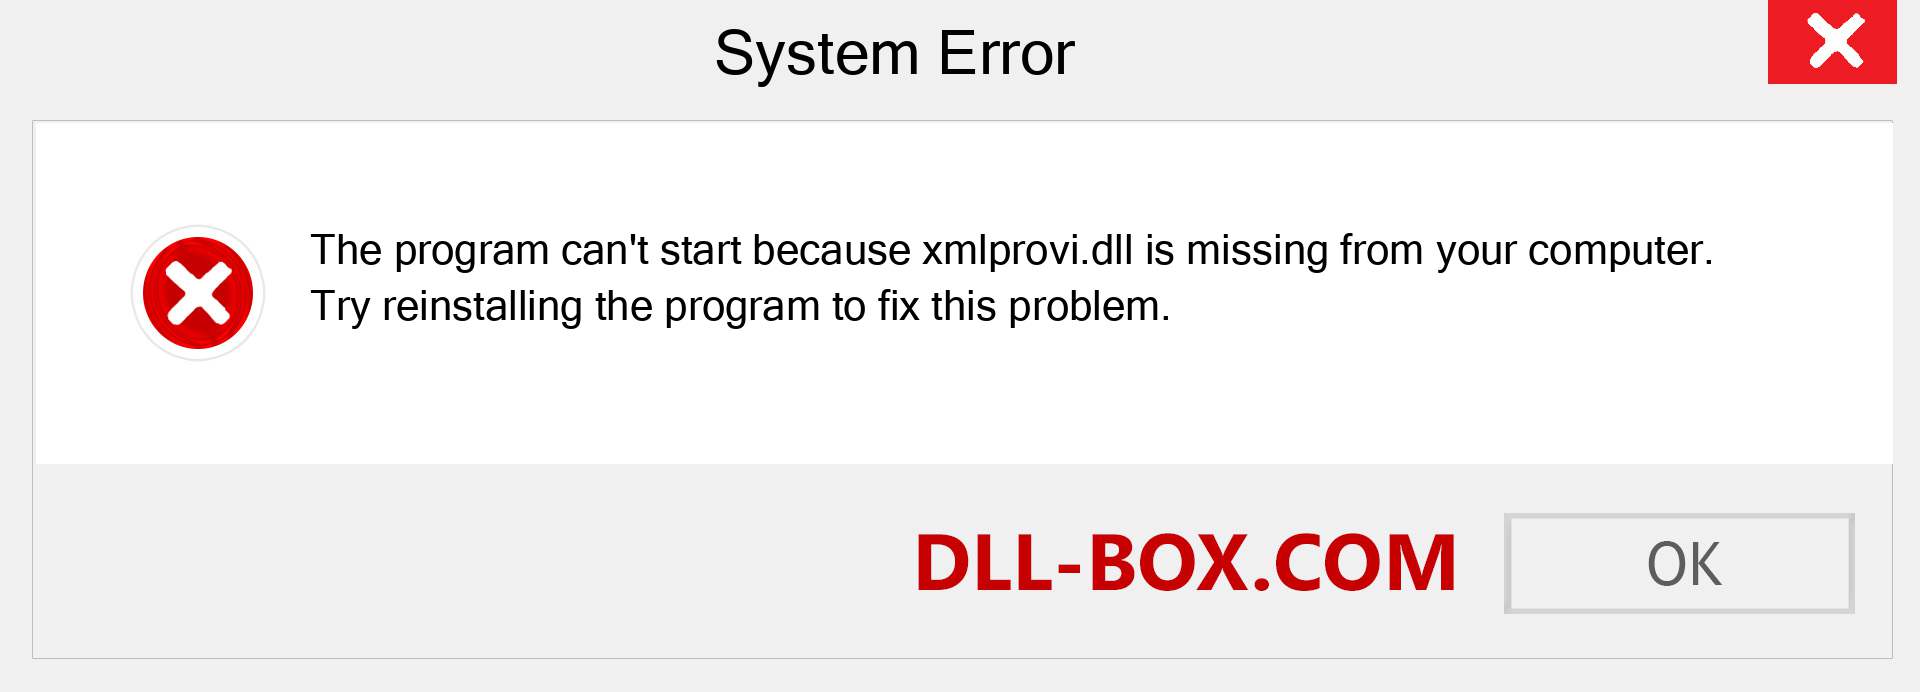  xmlprovi.dll file is missing?. Download for Windows 7, 8, 10 - Fix  xmlprovi dll Missing Error on Windows, photos, images